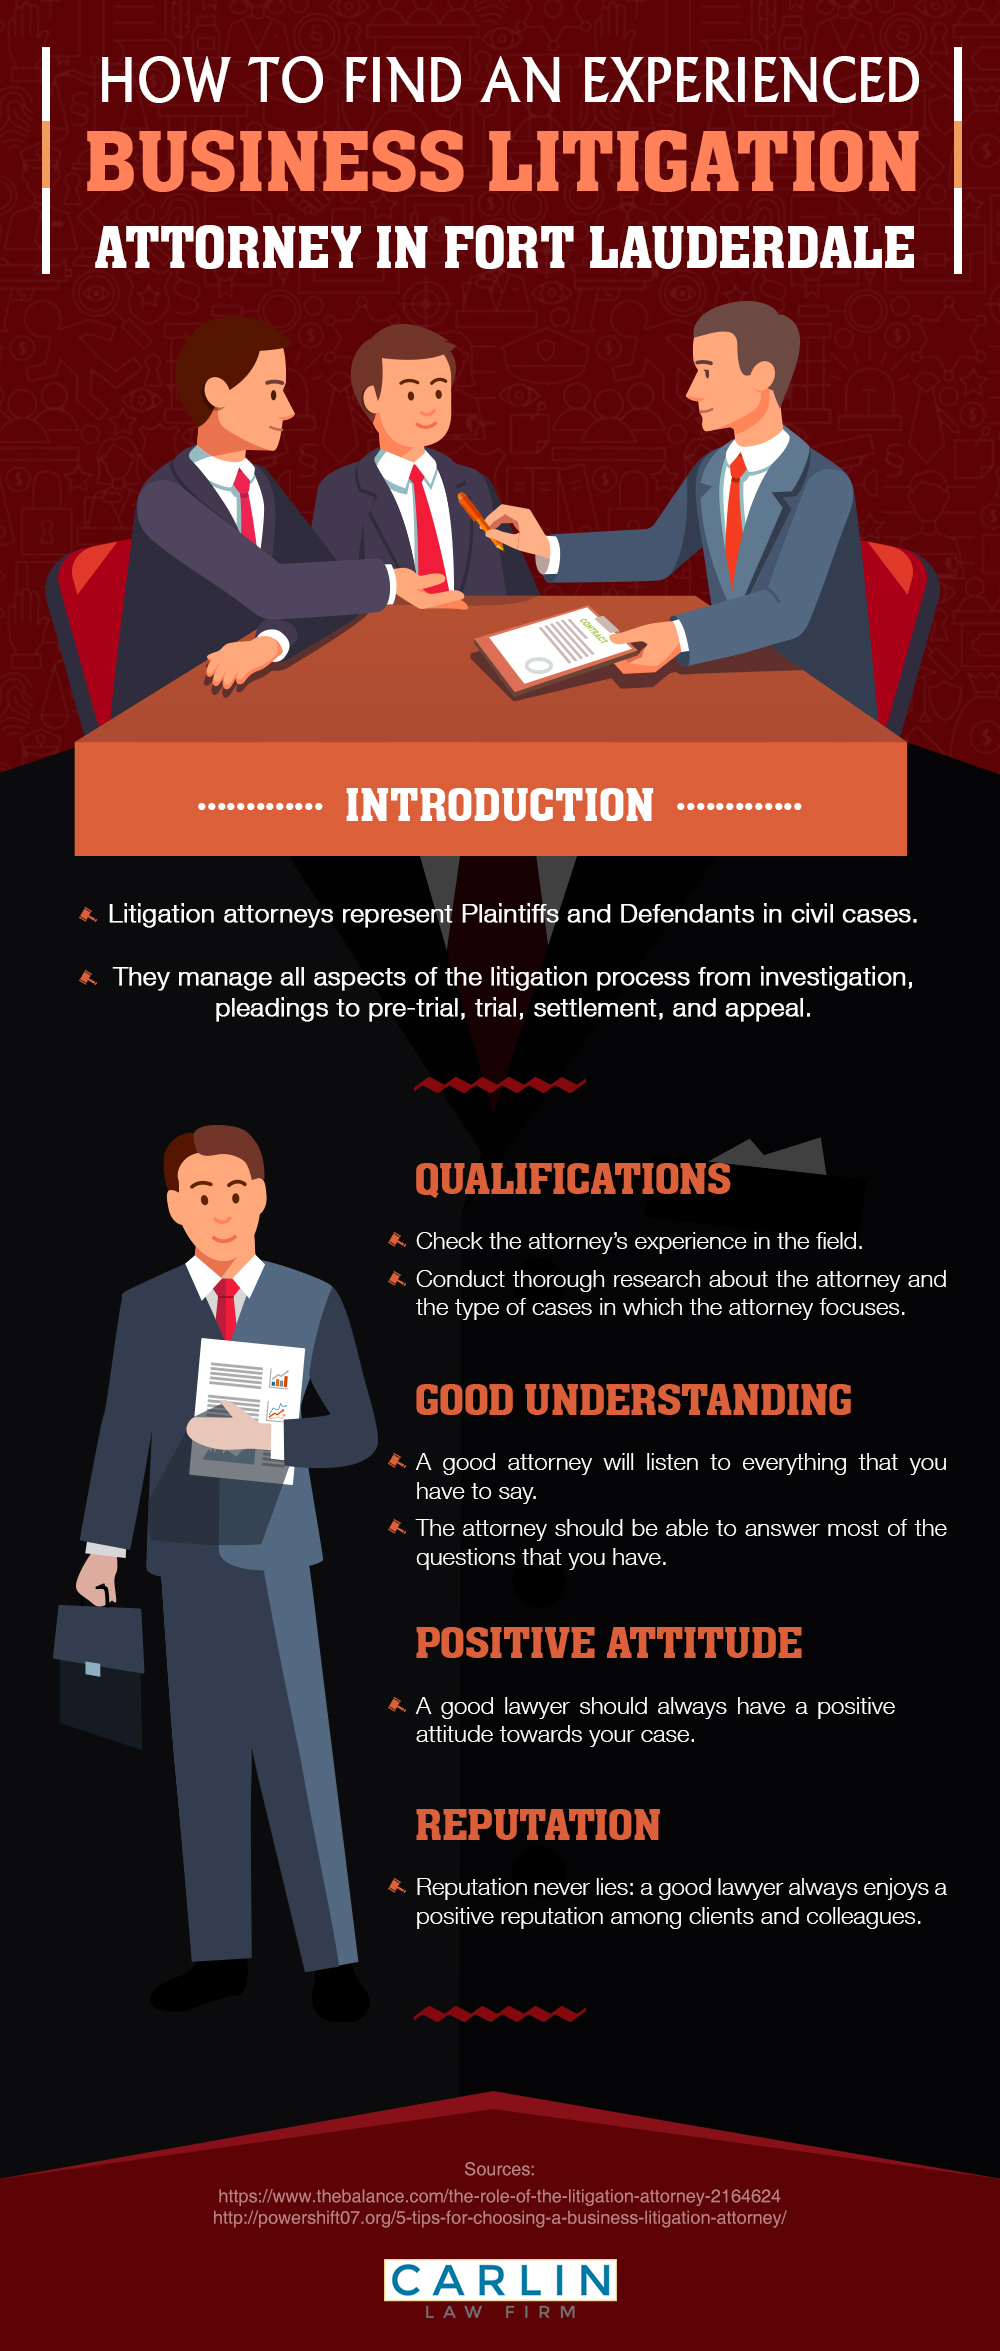 How to find an Experienced Business Litigation Attorney